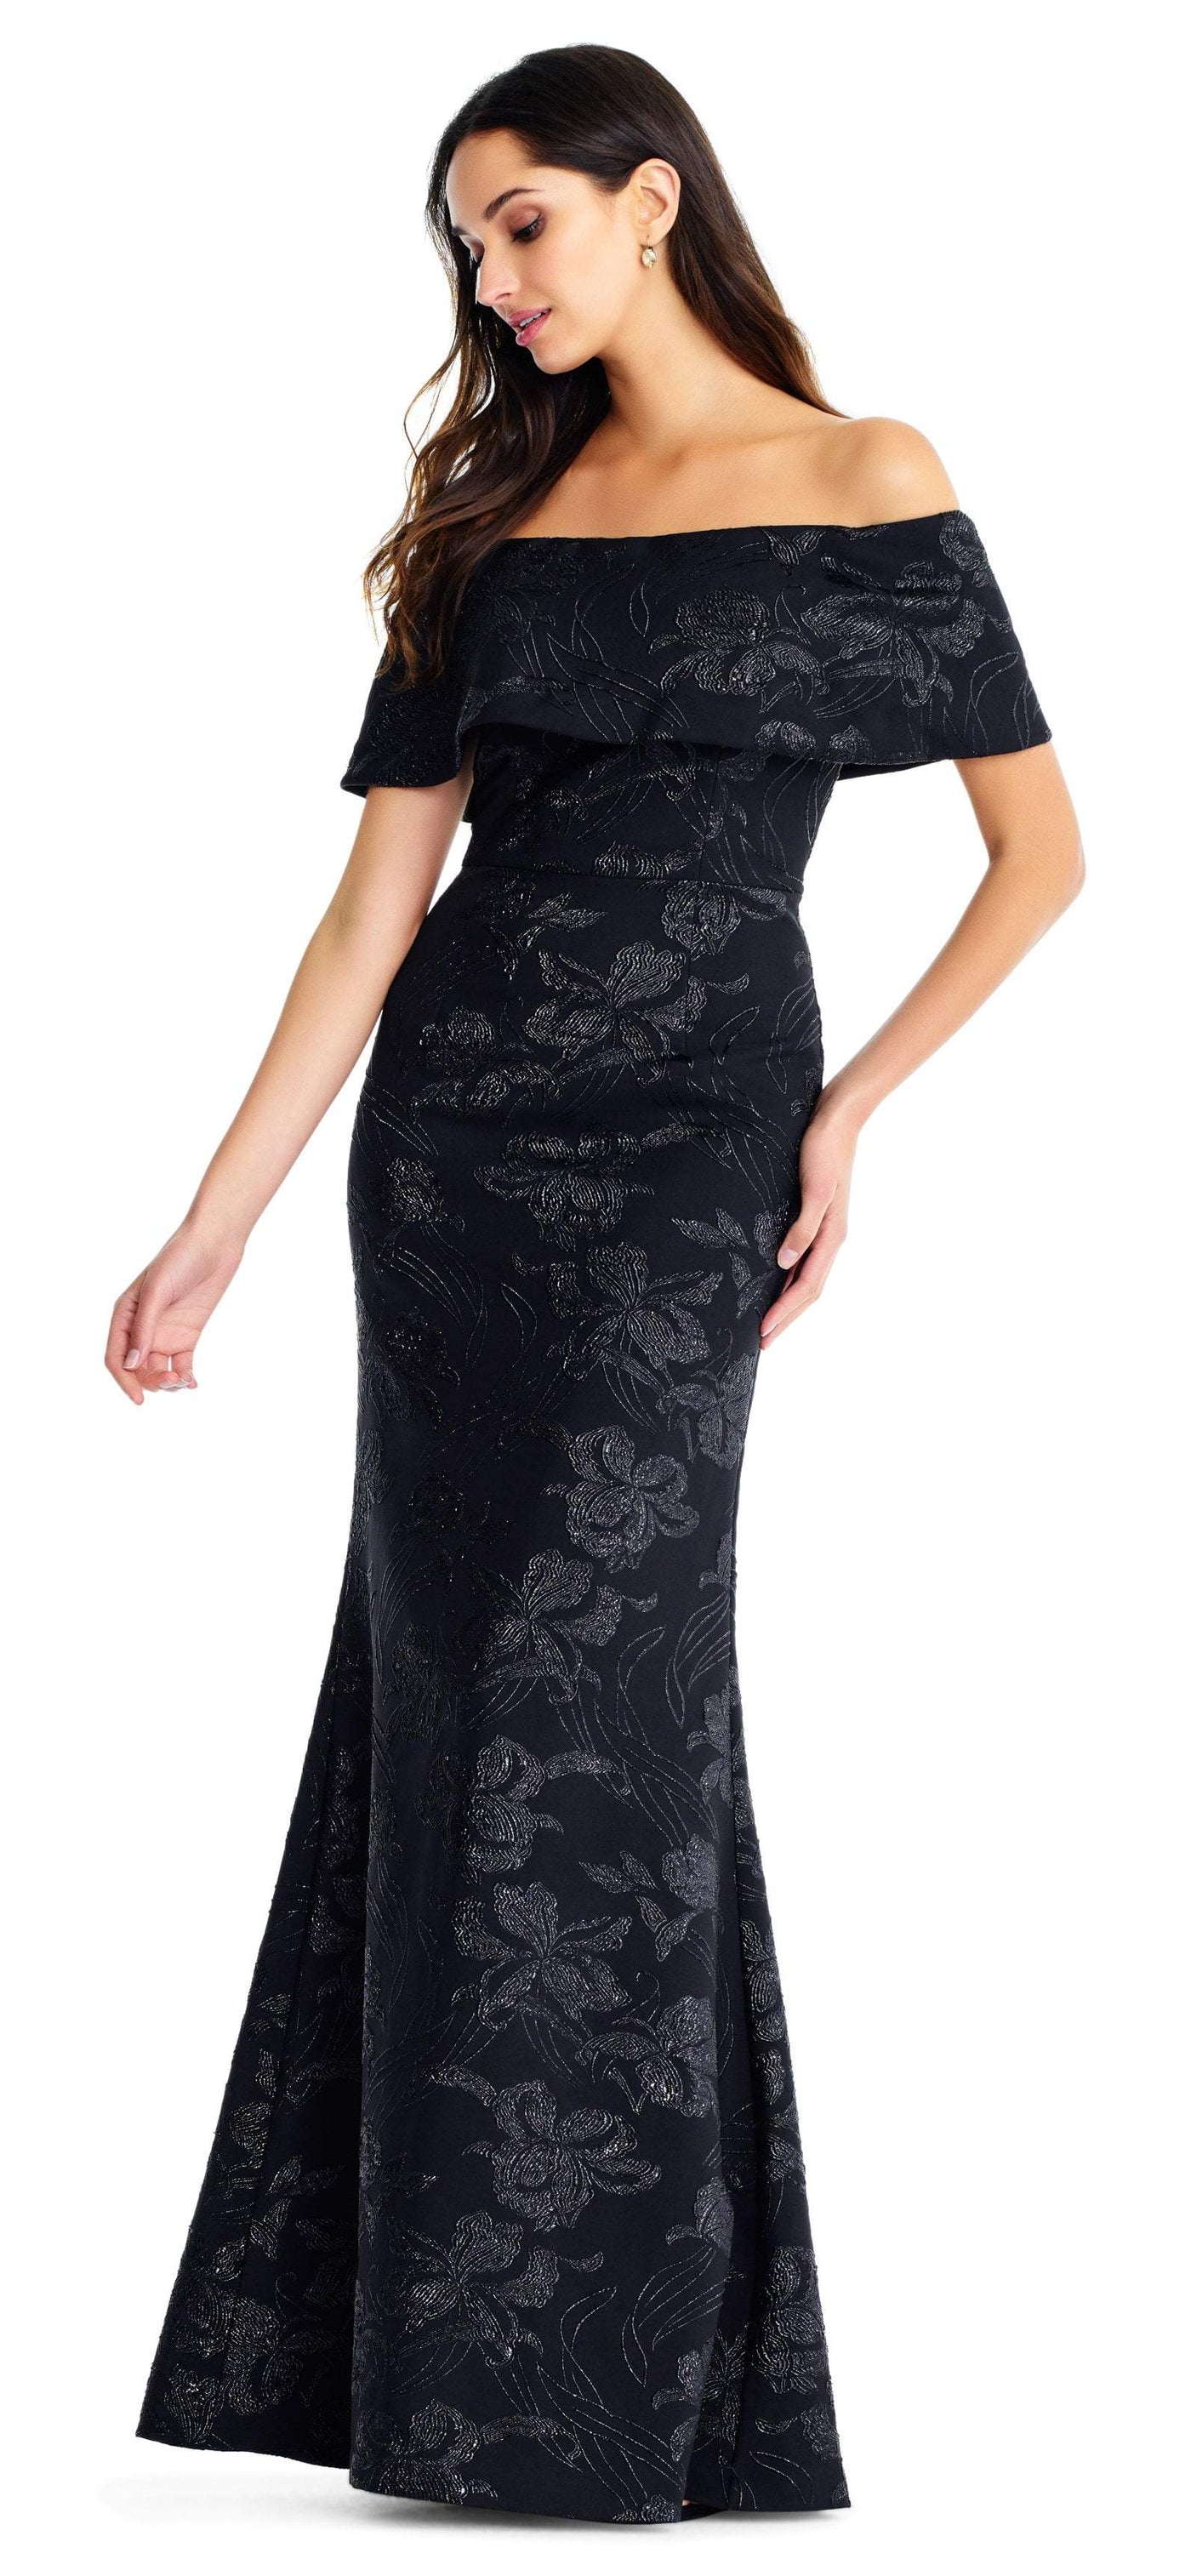 Aidan Mattox - MD1E203576 Off-Shoulder Floral Printed Trumpet Gown In Black